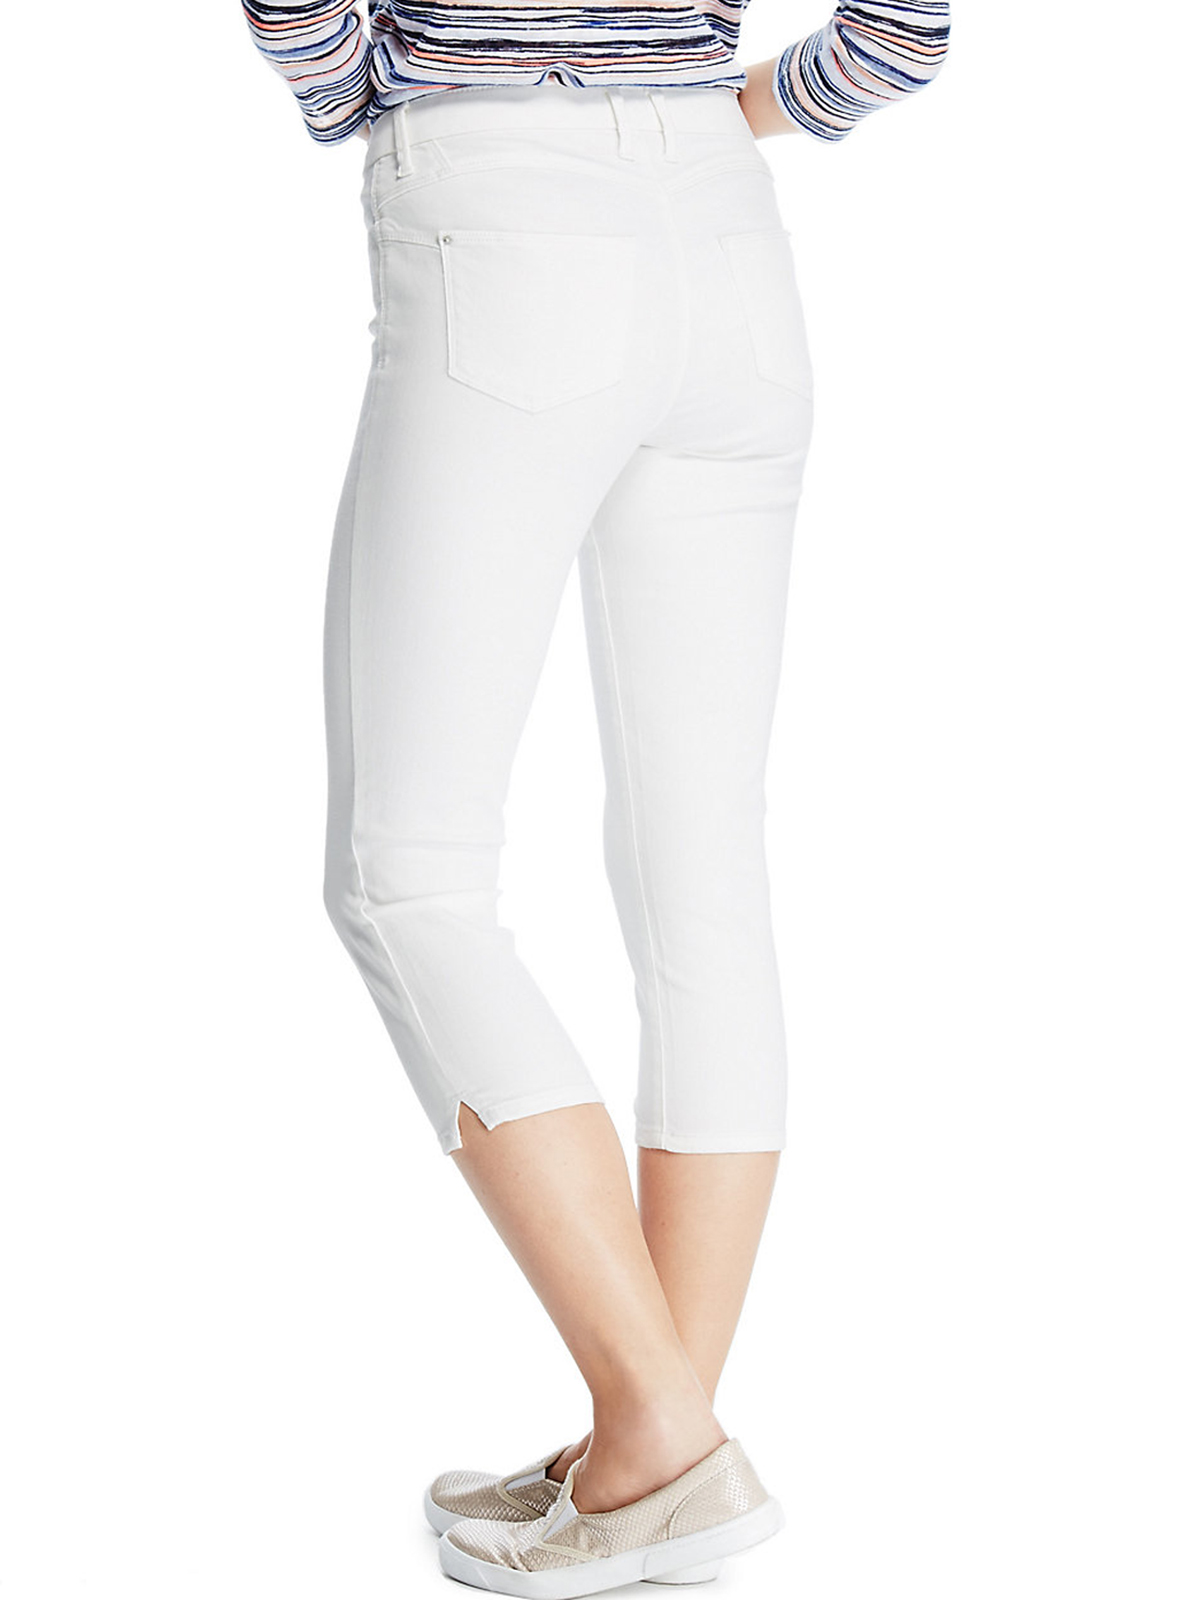 Marks and Spencer - - M&5 WHITE Cropped Sculpt & Lift Denim Jeans - Size 8